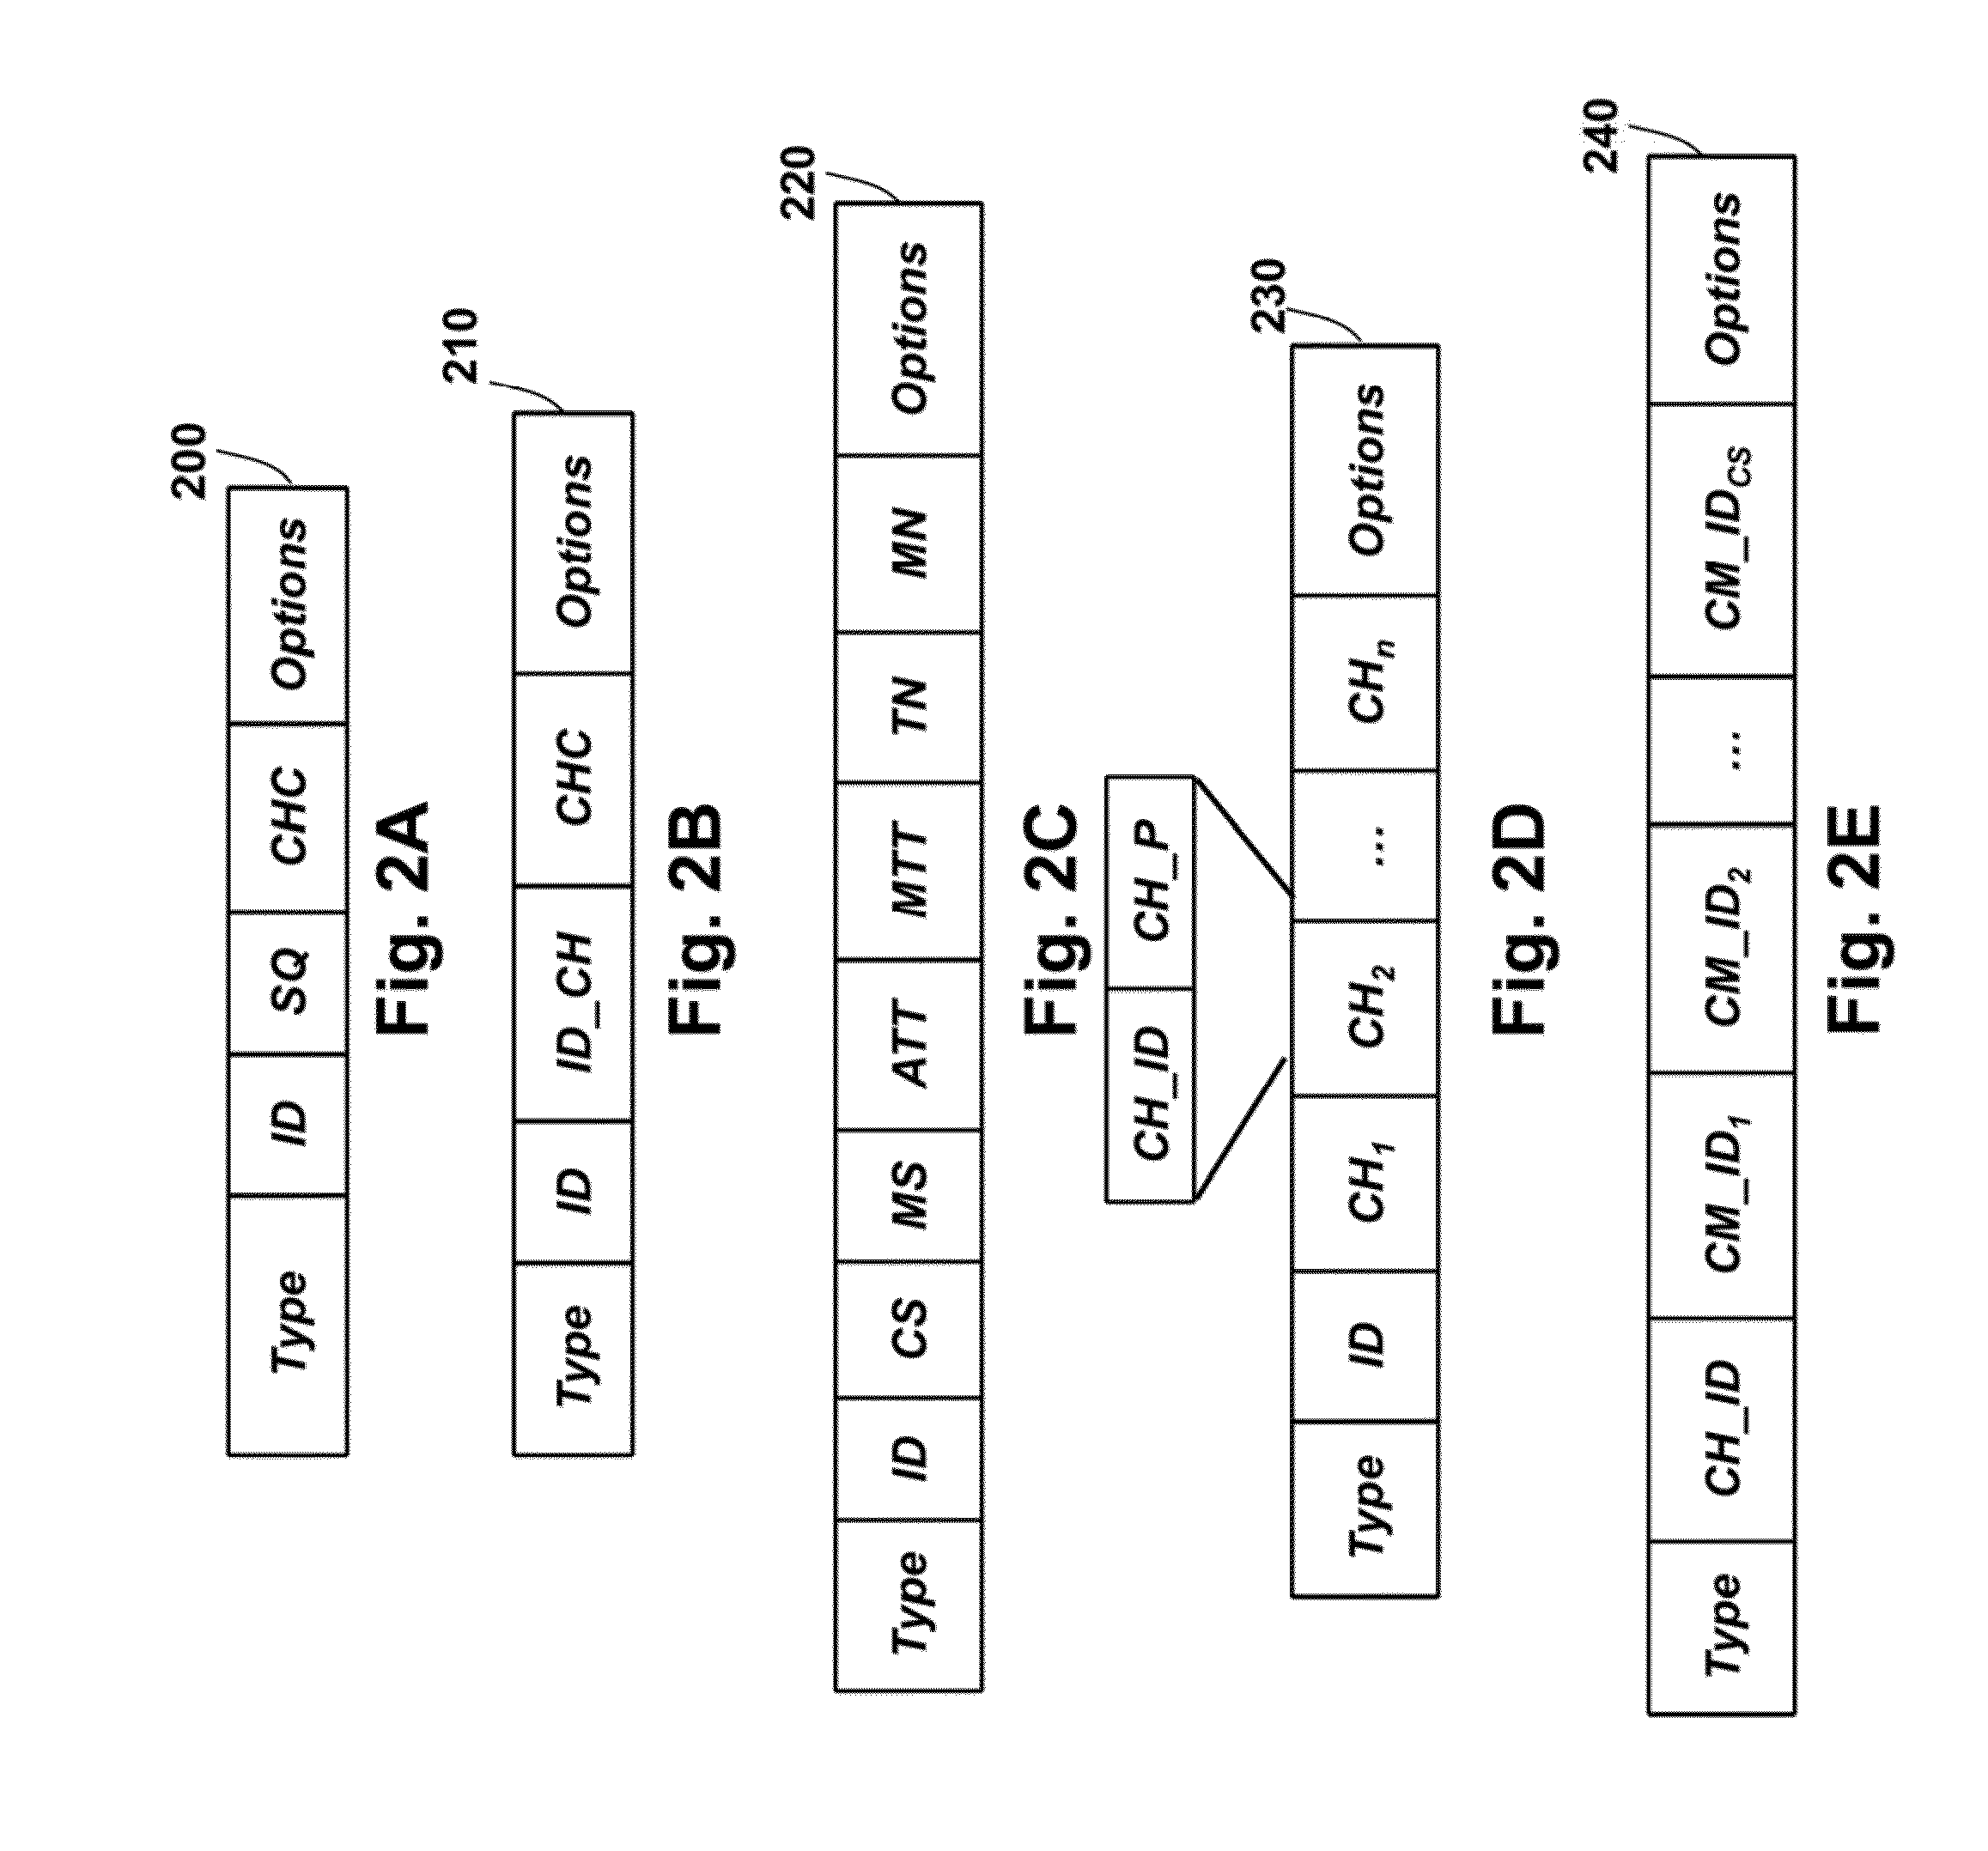 Method for Clustering Devices in Machine-to-Machine Networks to Minimize Collisions